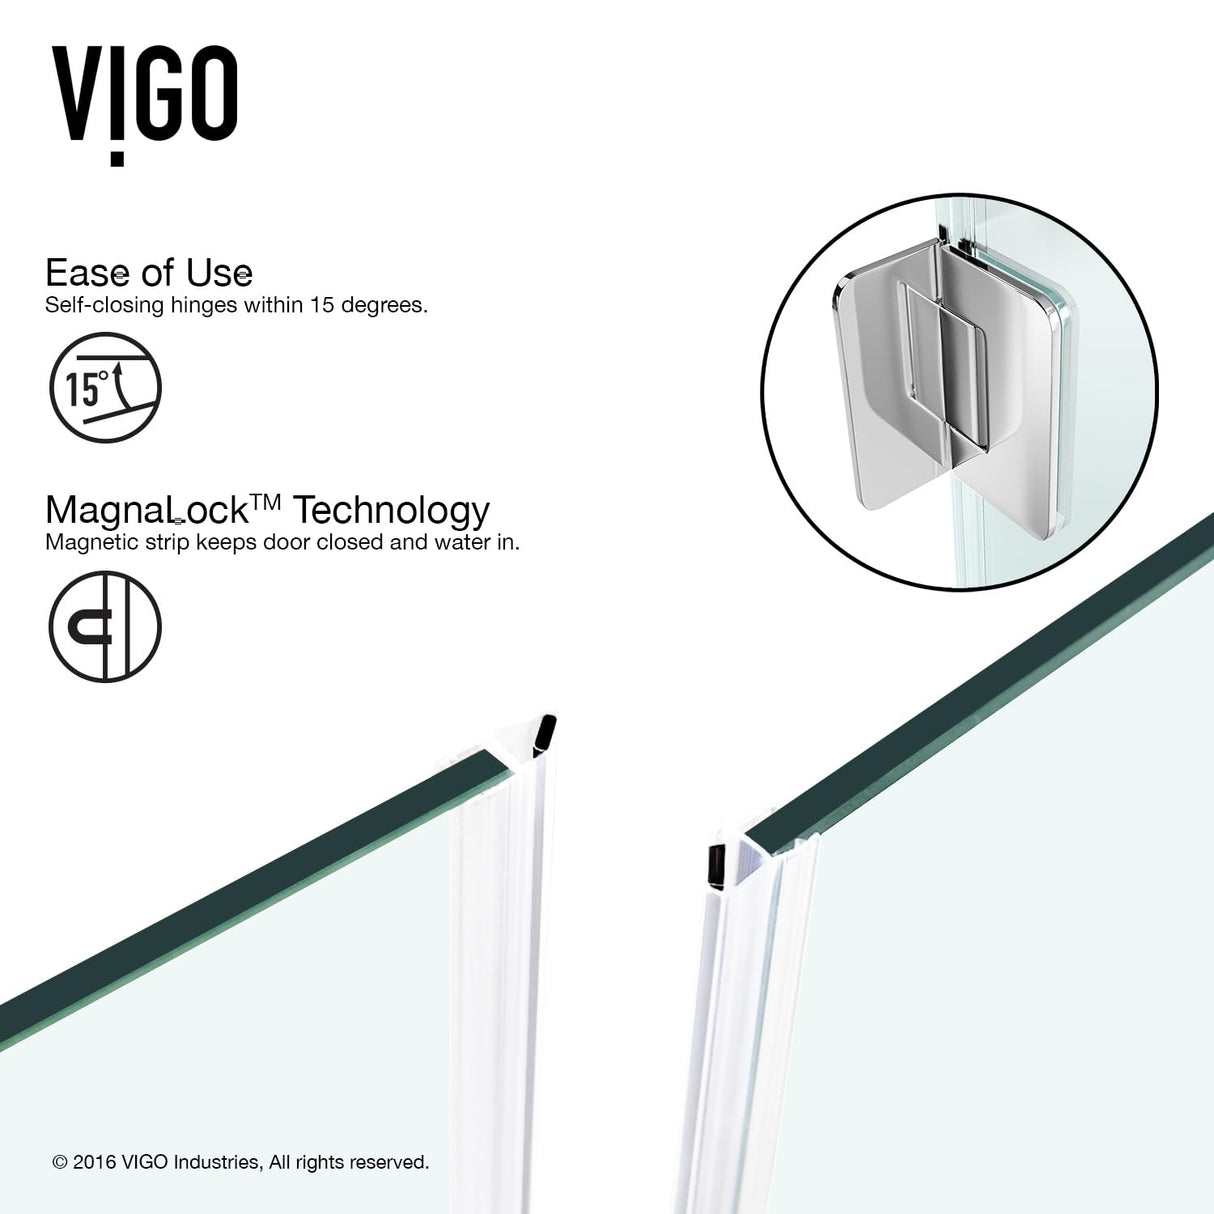 VIGO VG6062CHCL36WS 36.13" -36.13"W -76.75"H Frameless Hinged Neo-angle Shower Enclosure with Clear 0.38" Tempered Glass Stainless Steel Hardware in Chrome Finish with Reversible Handle and Base